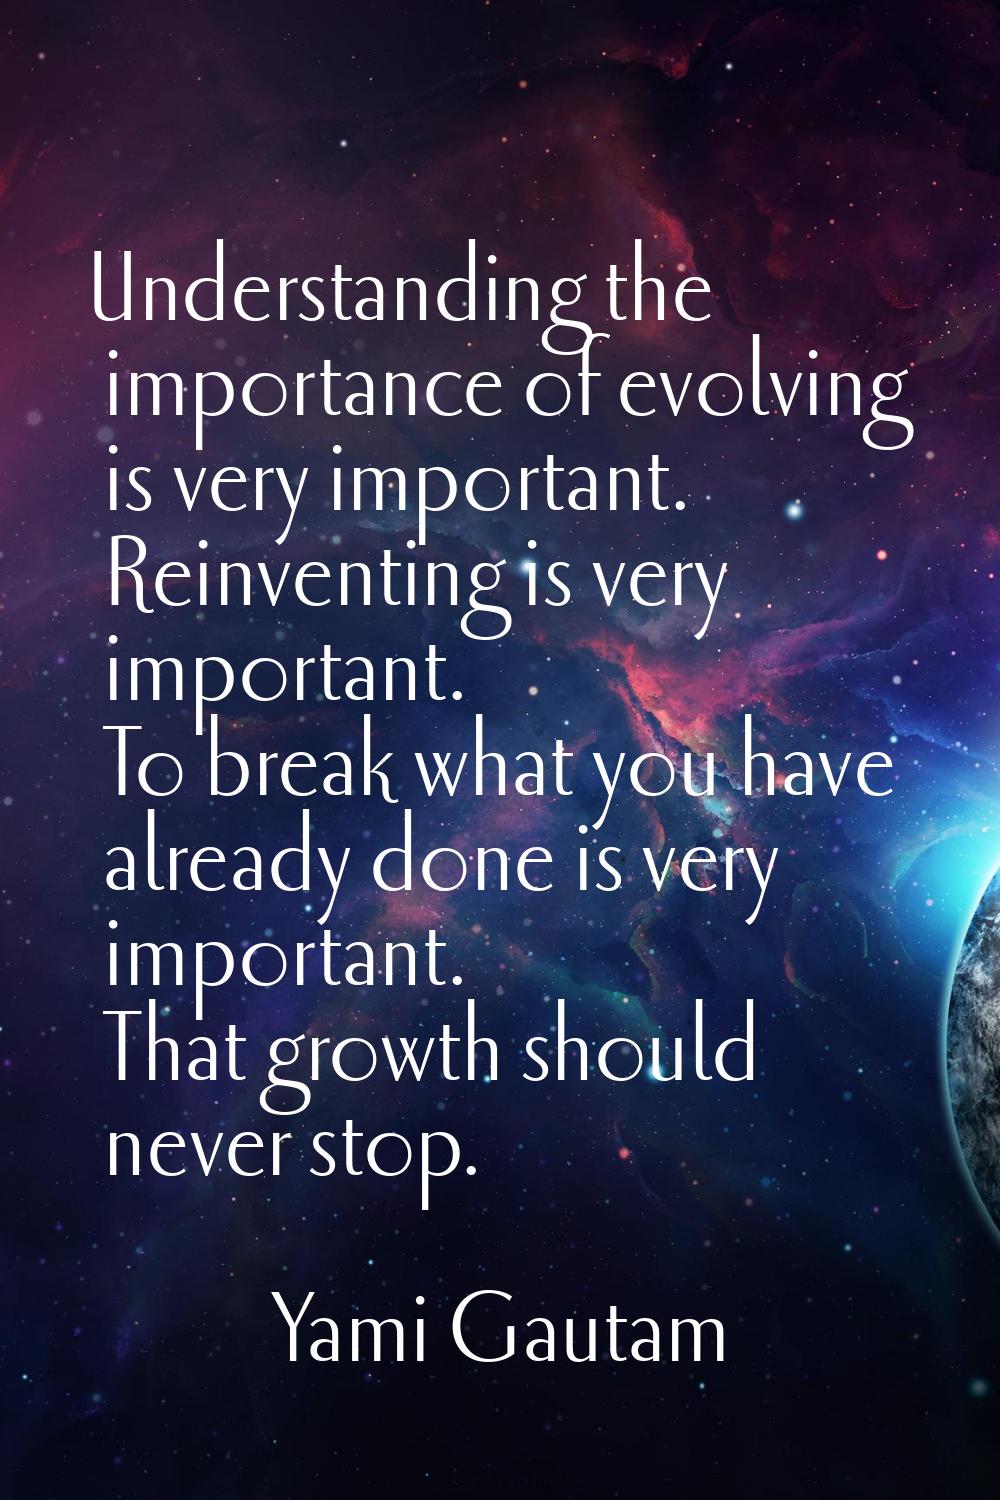 Understanding the importance of evolving is very important. Reinventing is very important. To break